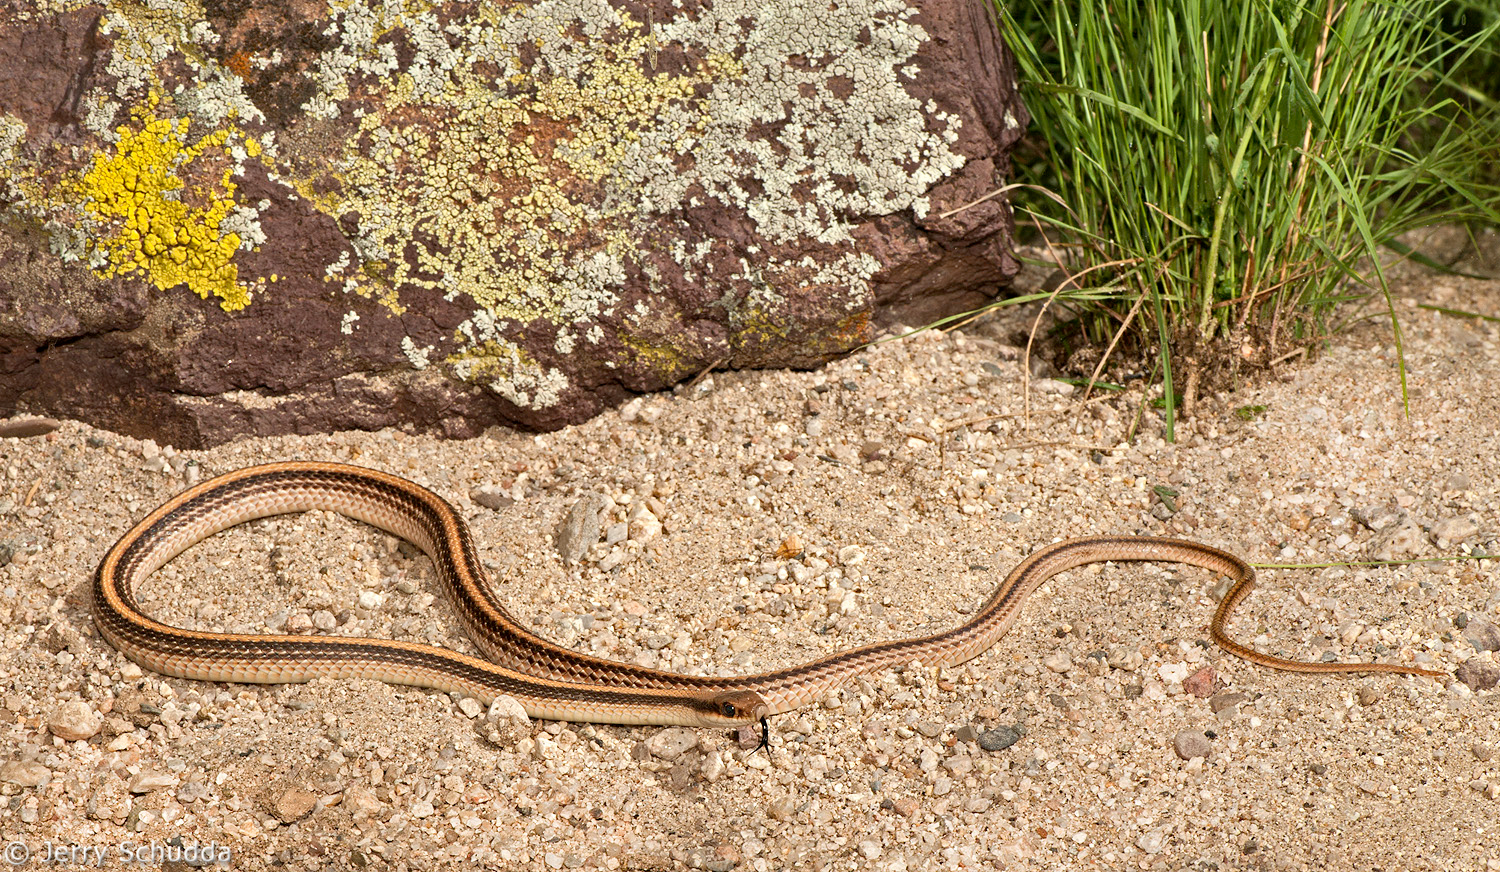 Western Patch-nosed Snake 1         